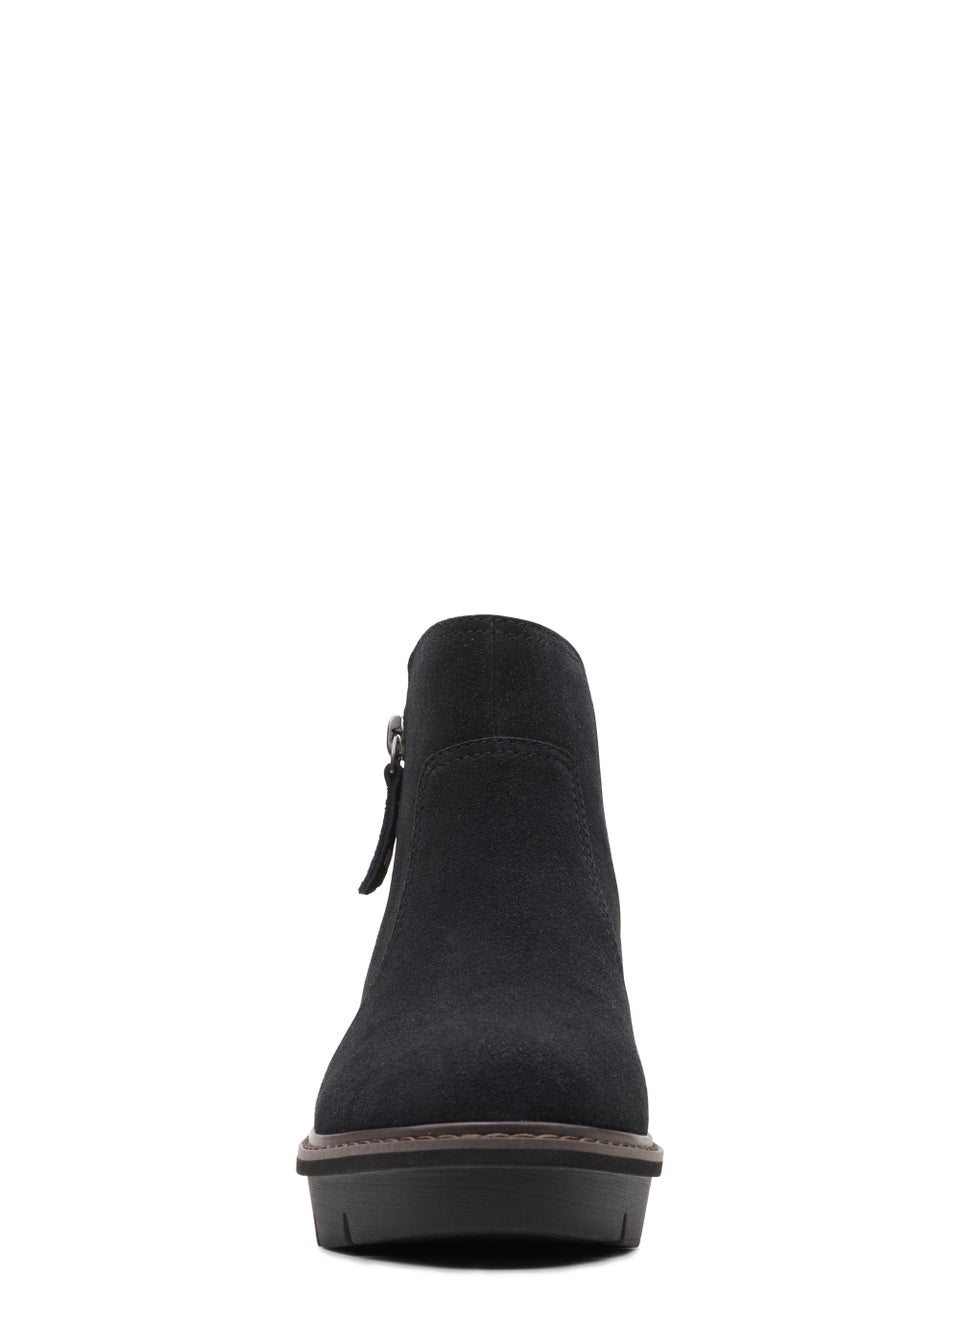 Clarks Black Airabell Zip Suede Ankle Boots - Matalan